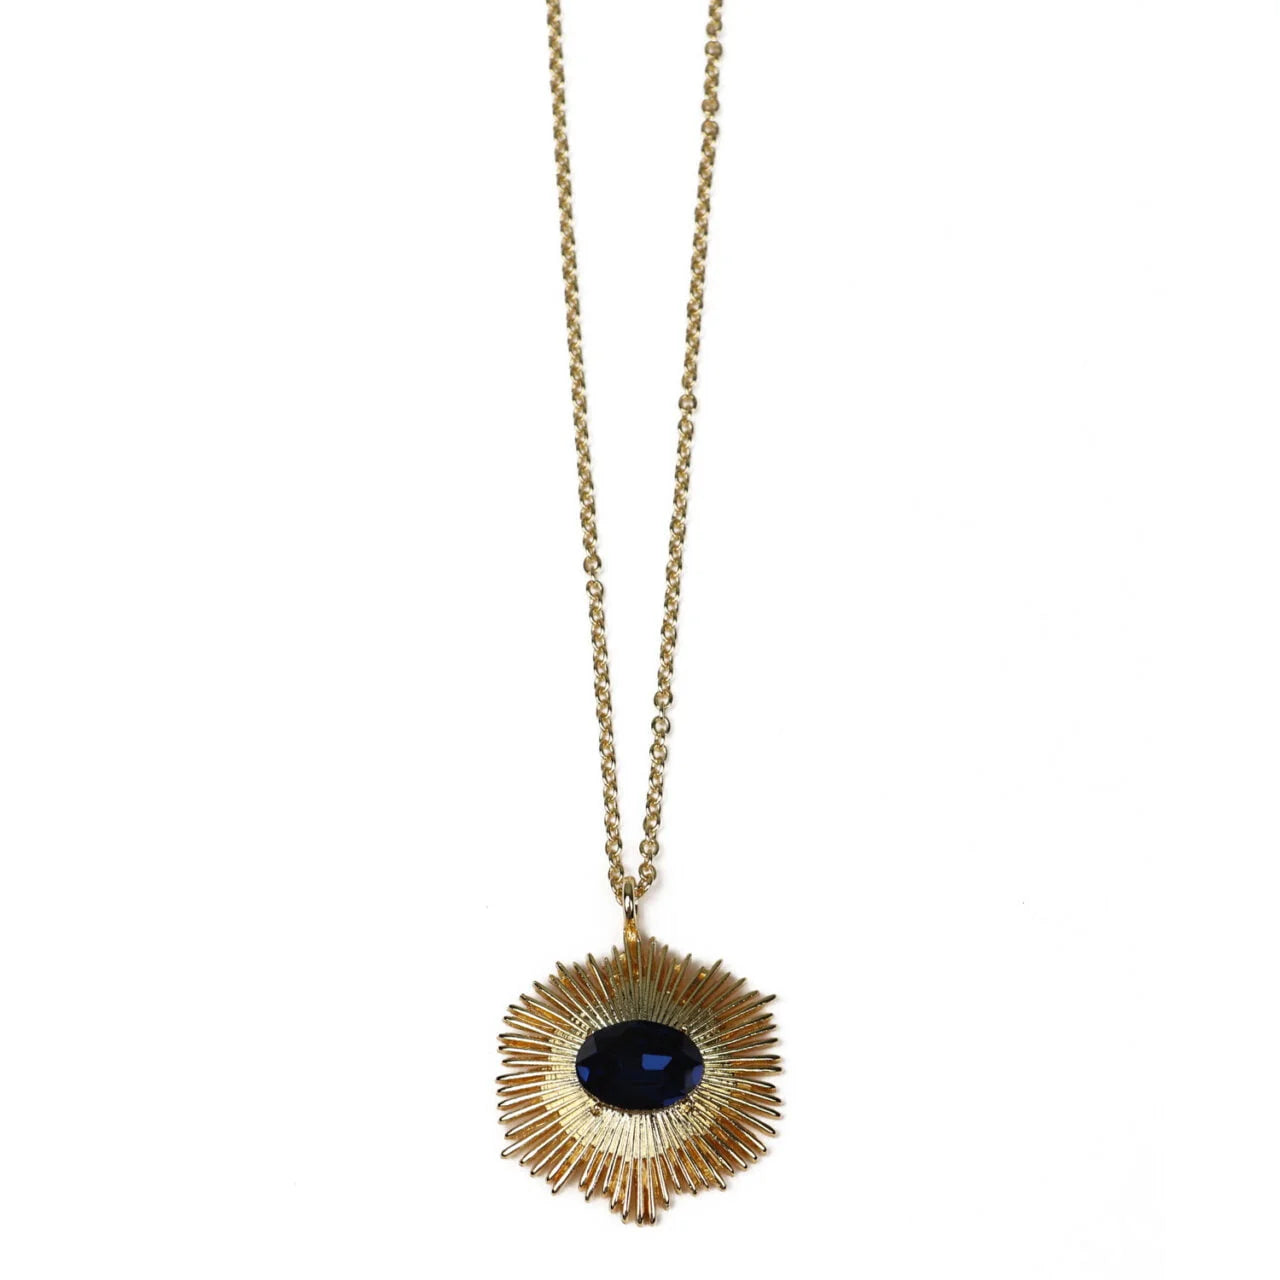 Fab Gifts | Jewellery Necklace Sunburst Navy by Weirs of Baggot Street